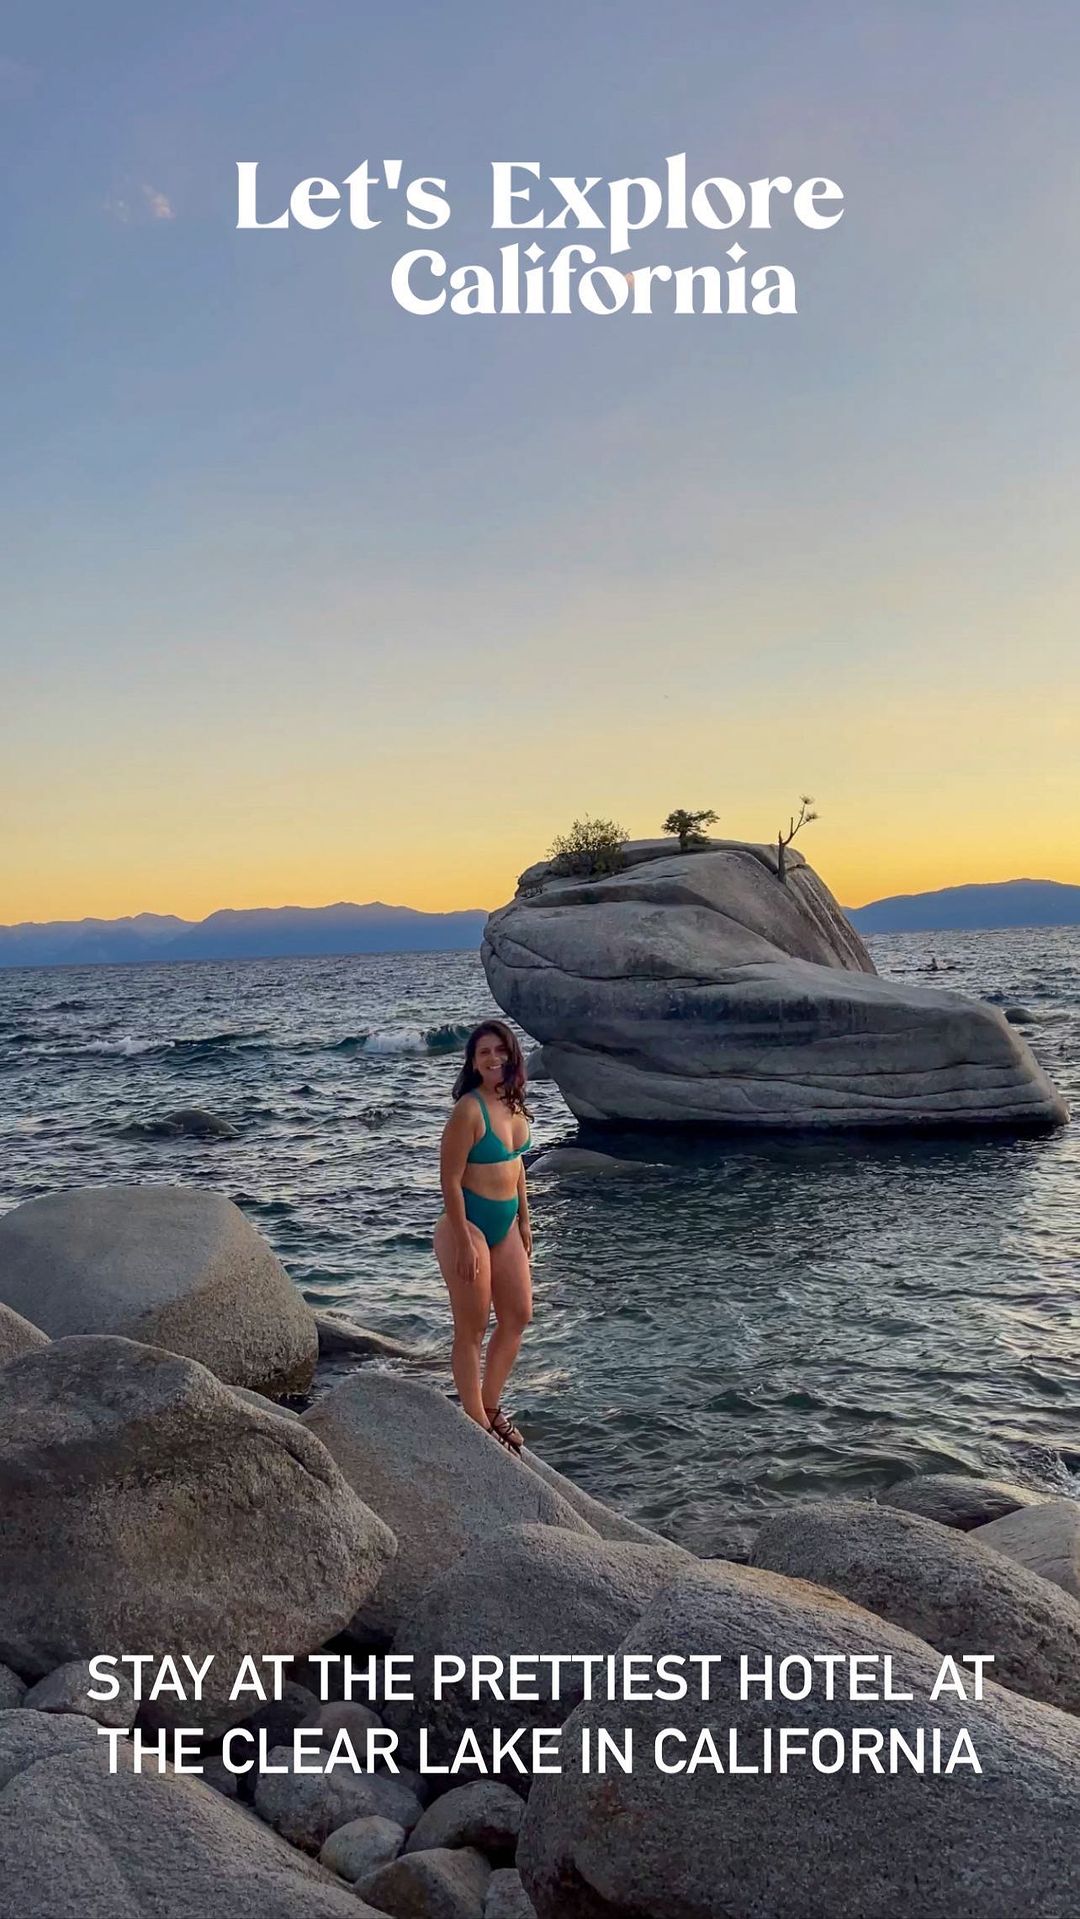 Lake Tahoe's Majestic Beginnings and Scenic Arrival: 4-Day South Lake Tahoe Adventure